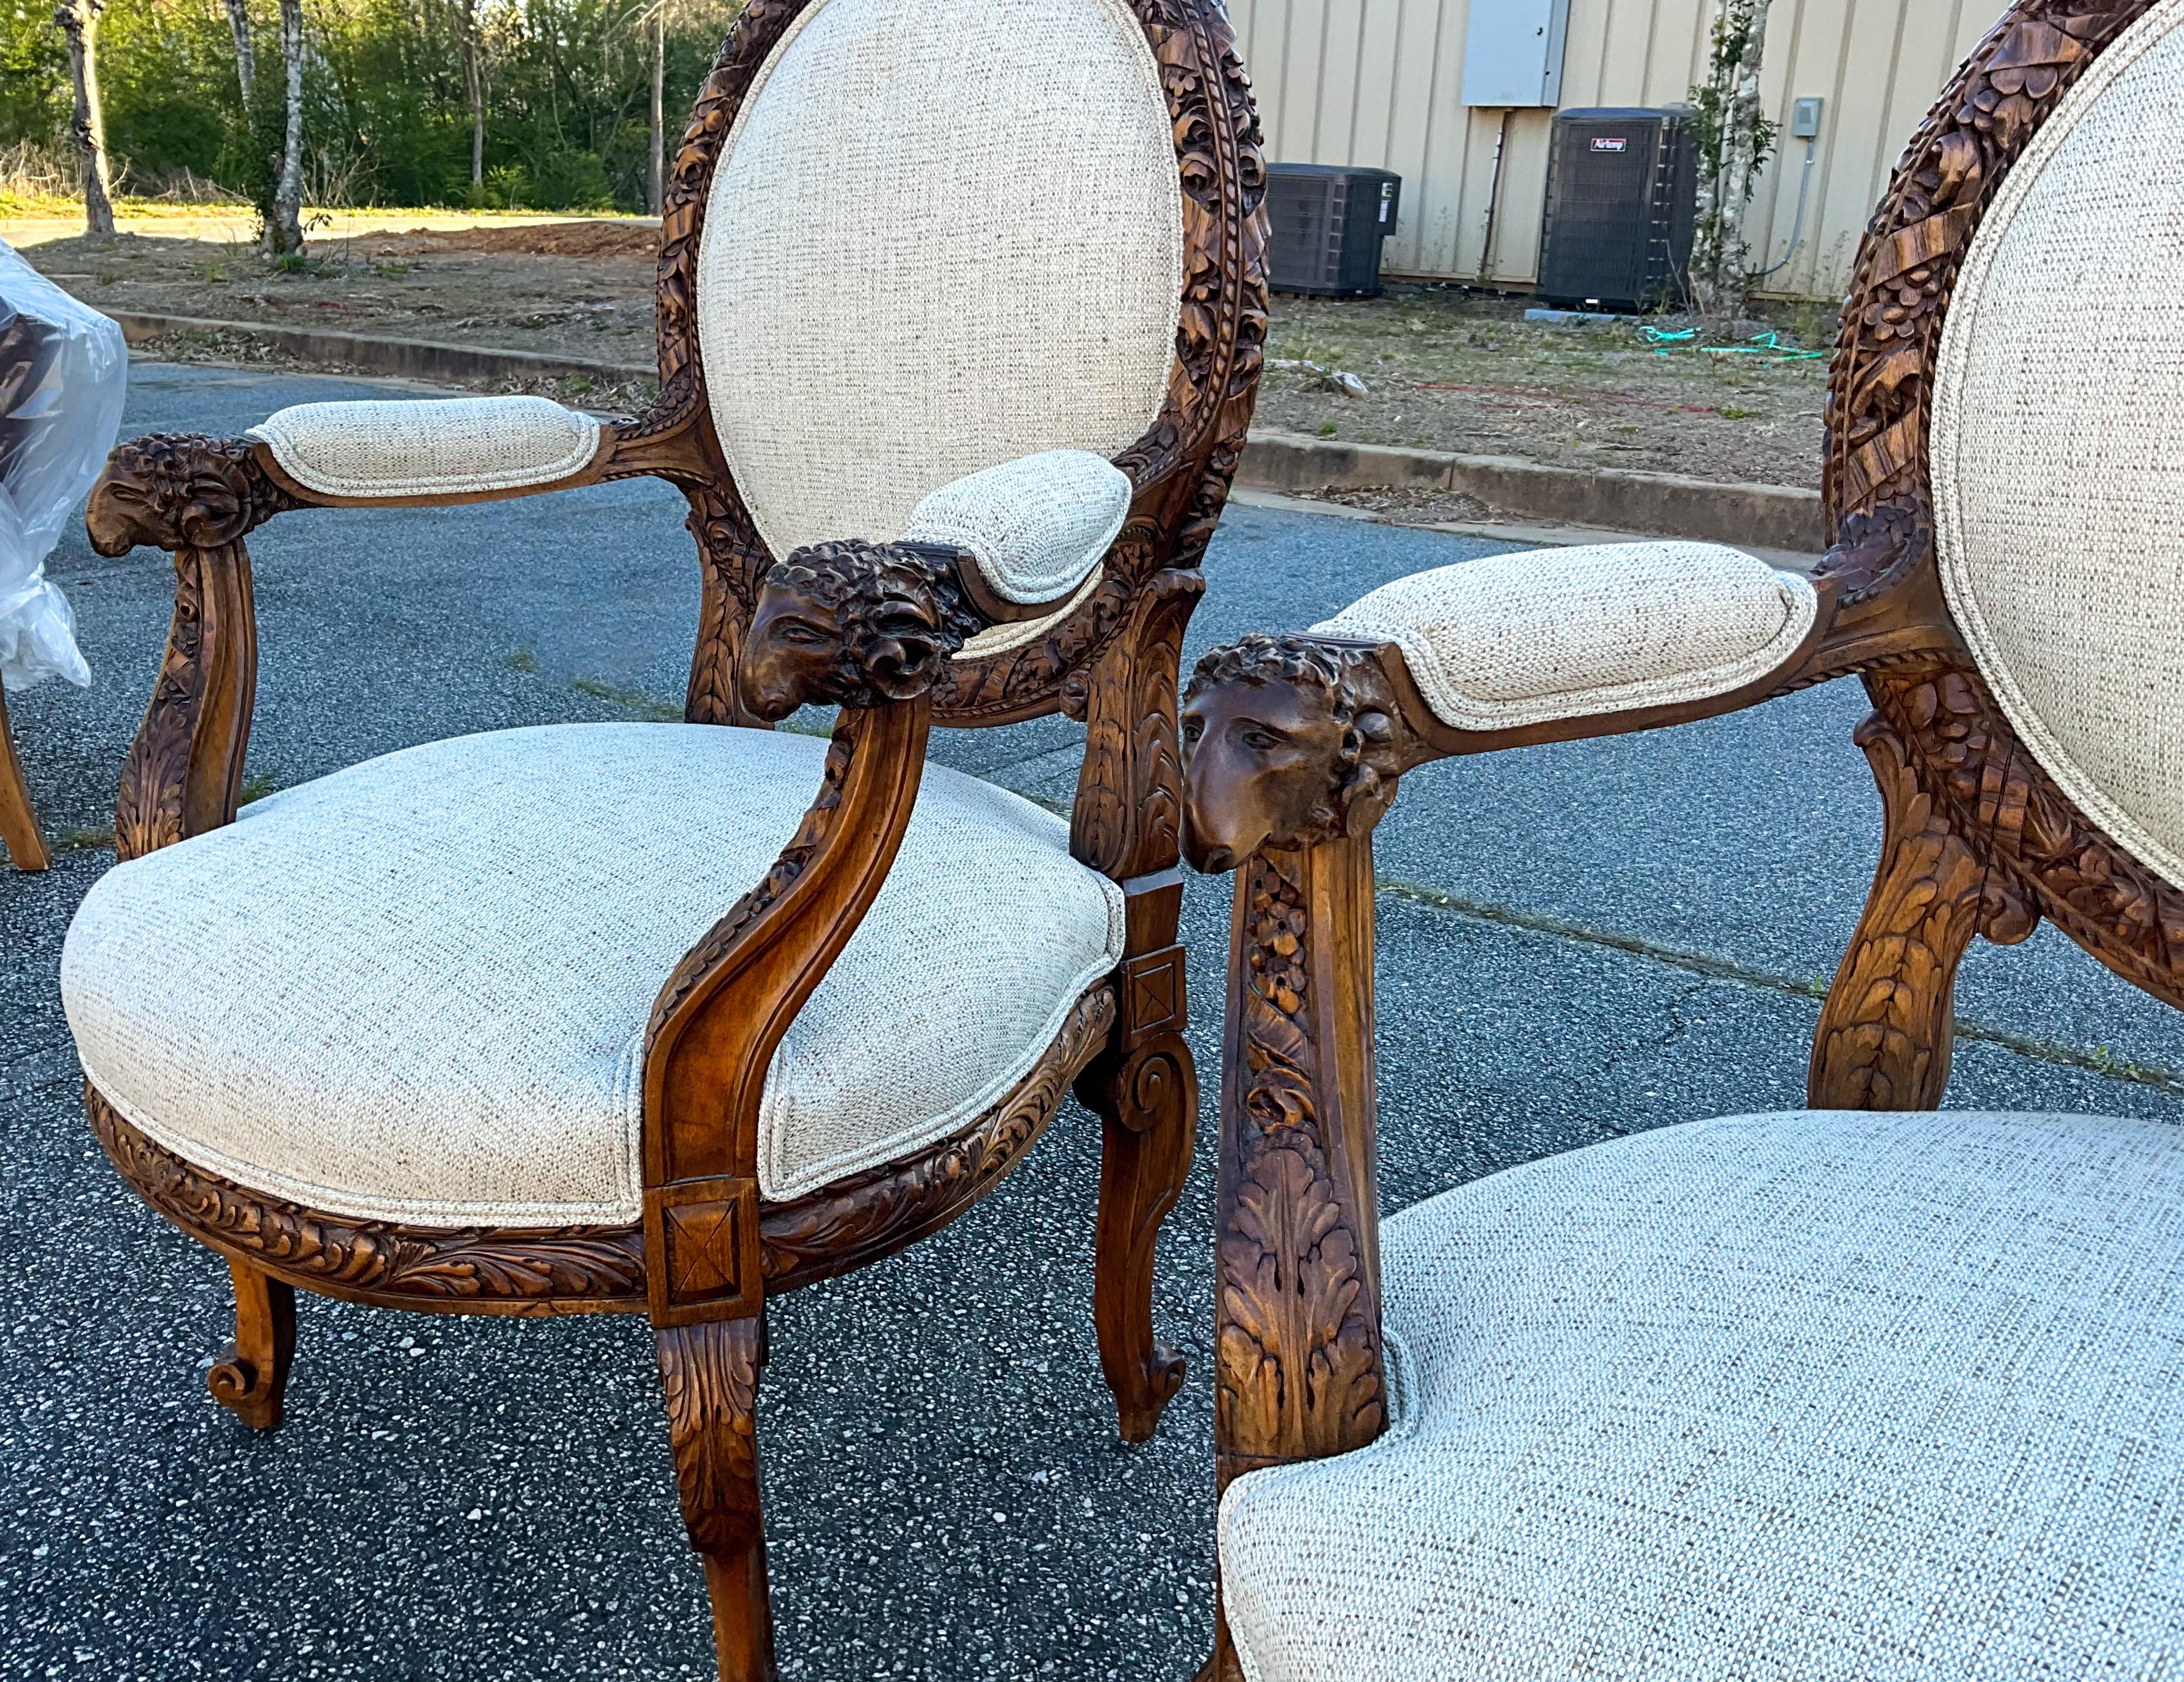 These are fabulous! This is a pair of heavily carved walnut French bergere chairs. They have Neo-classical styling with the ram form arms and instruments along the back frame. The linen blend fabric is new. The arms are 27” in height. 

My